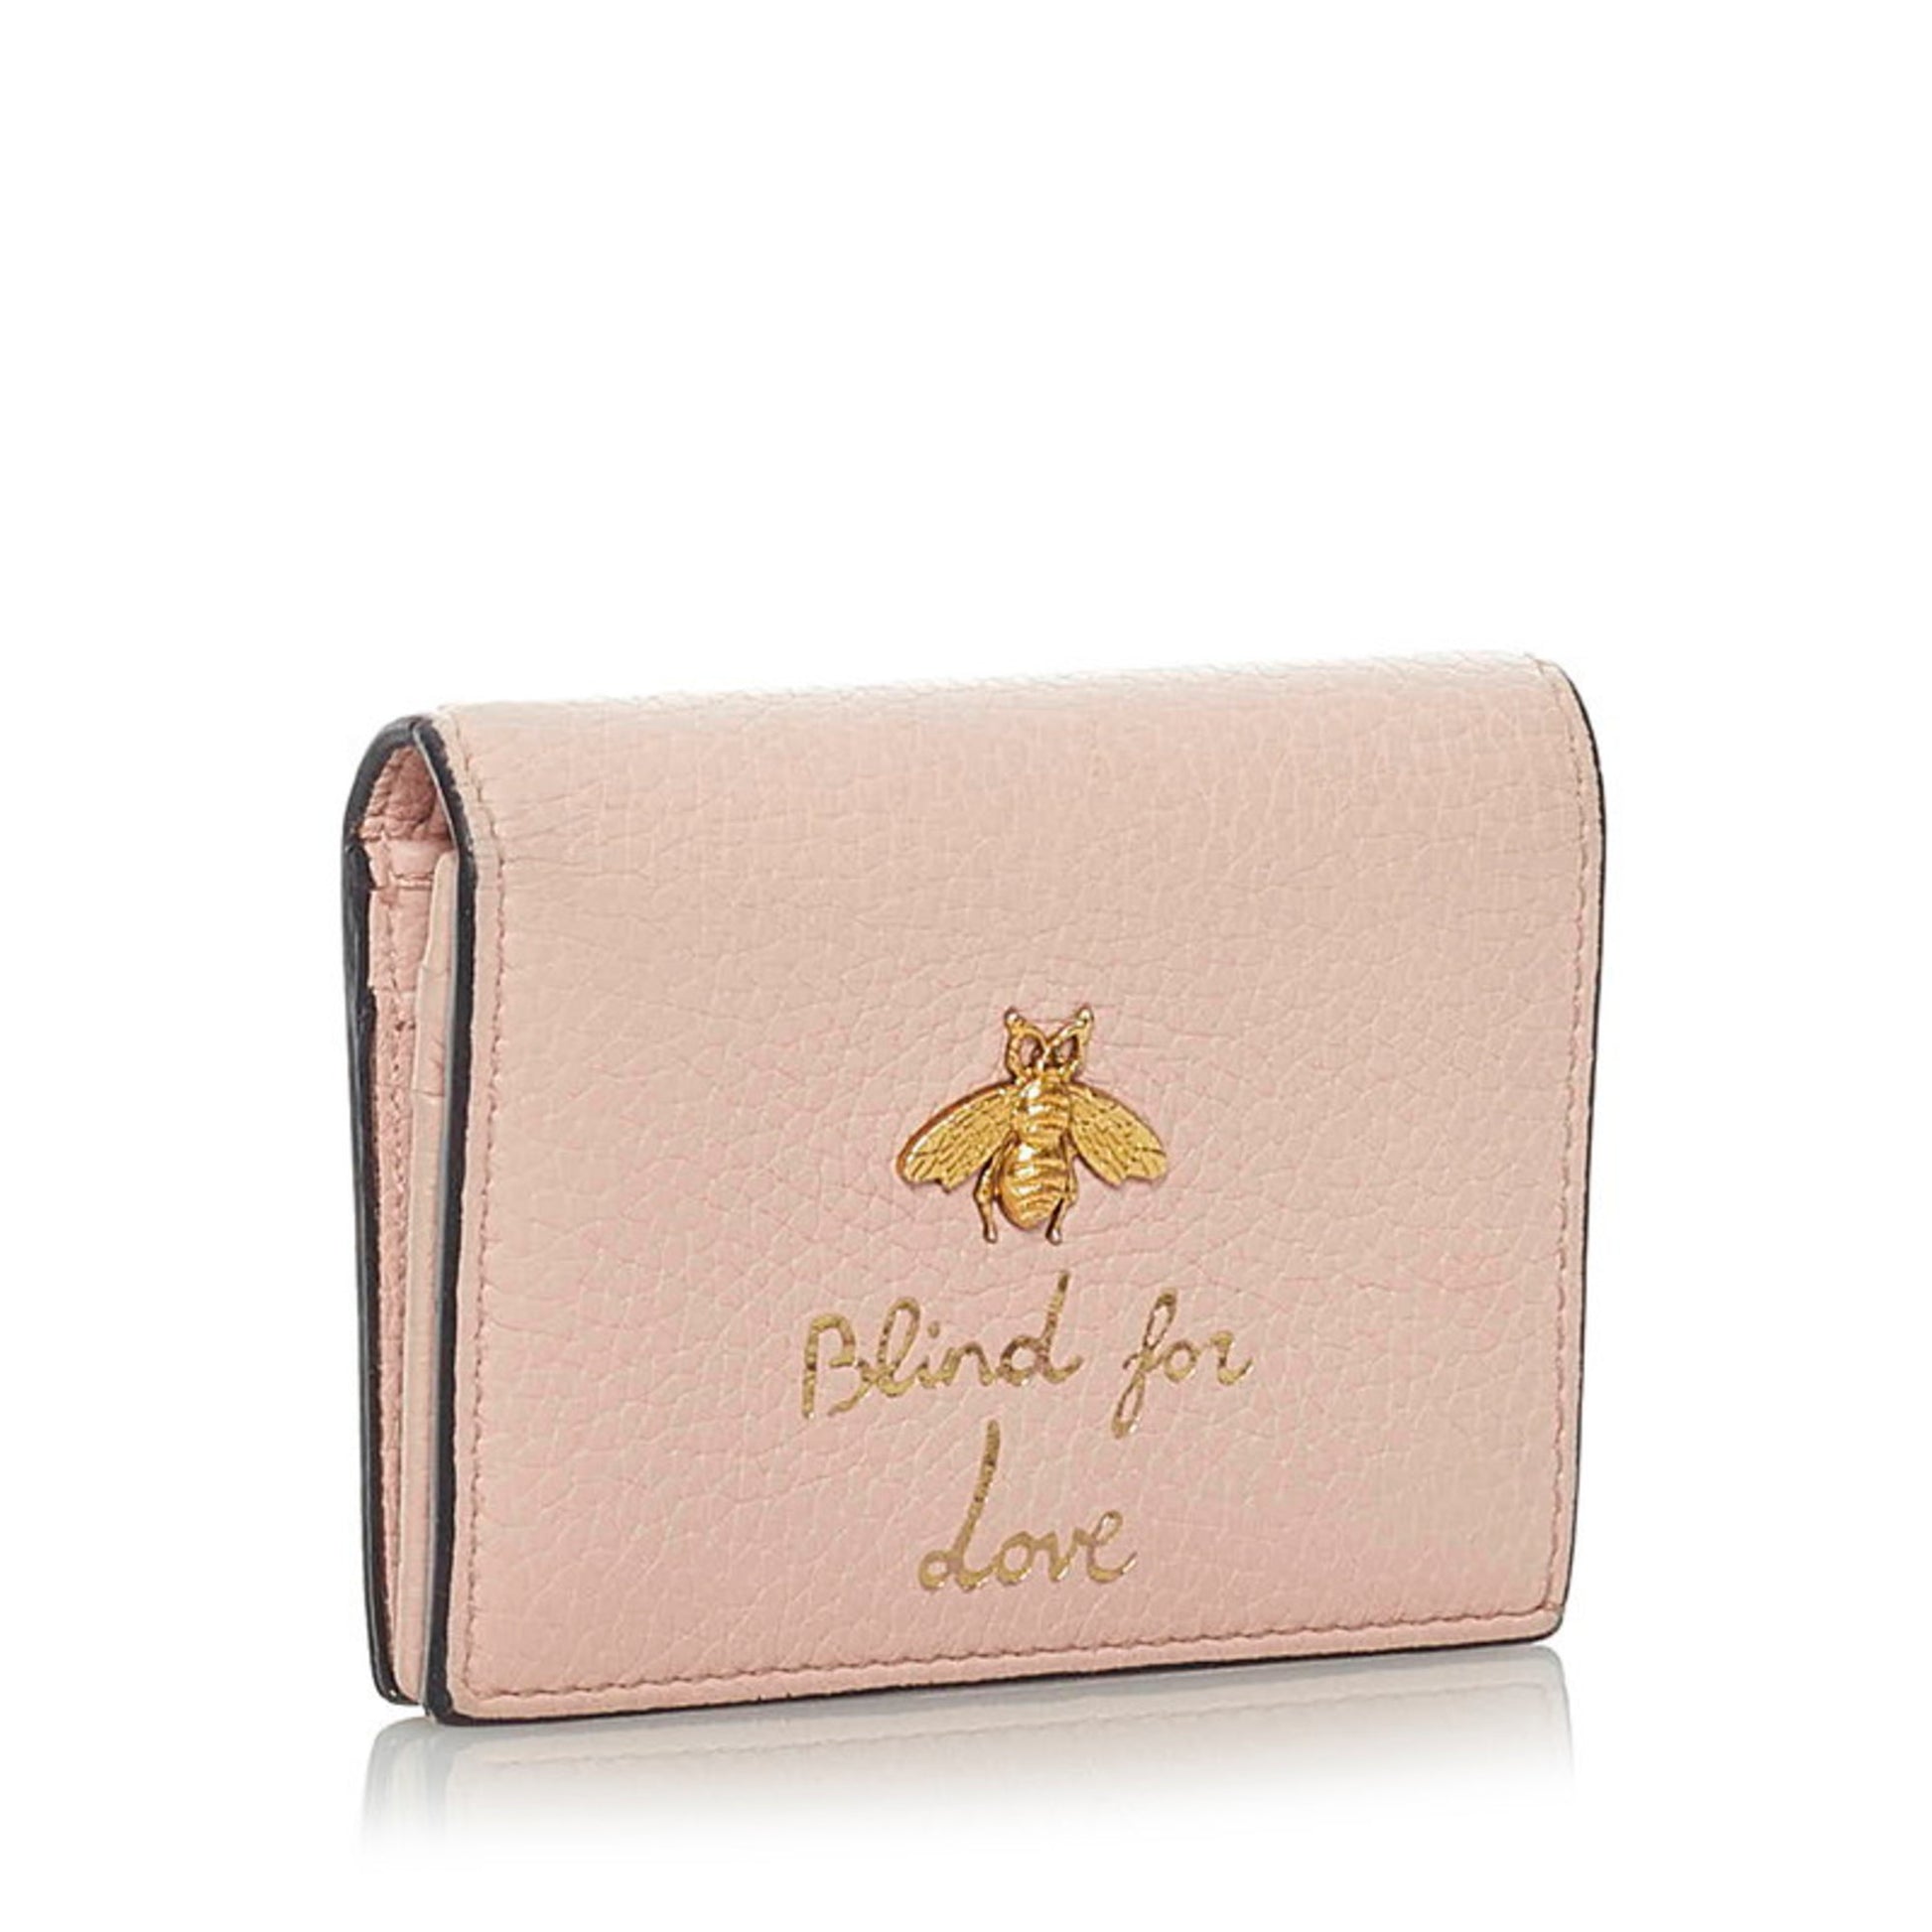 Gucci Animalier Bee Leather Card Case Light Pink 460185 Bi-Fold Mini Wallet  Compact